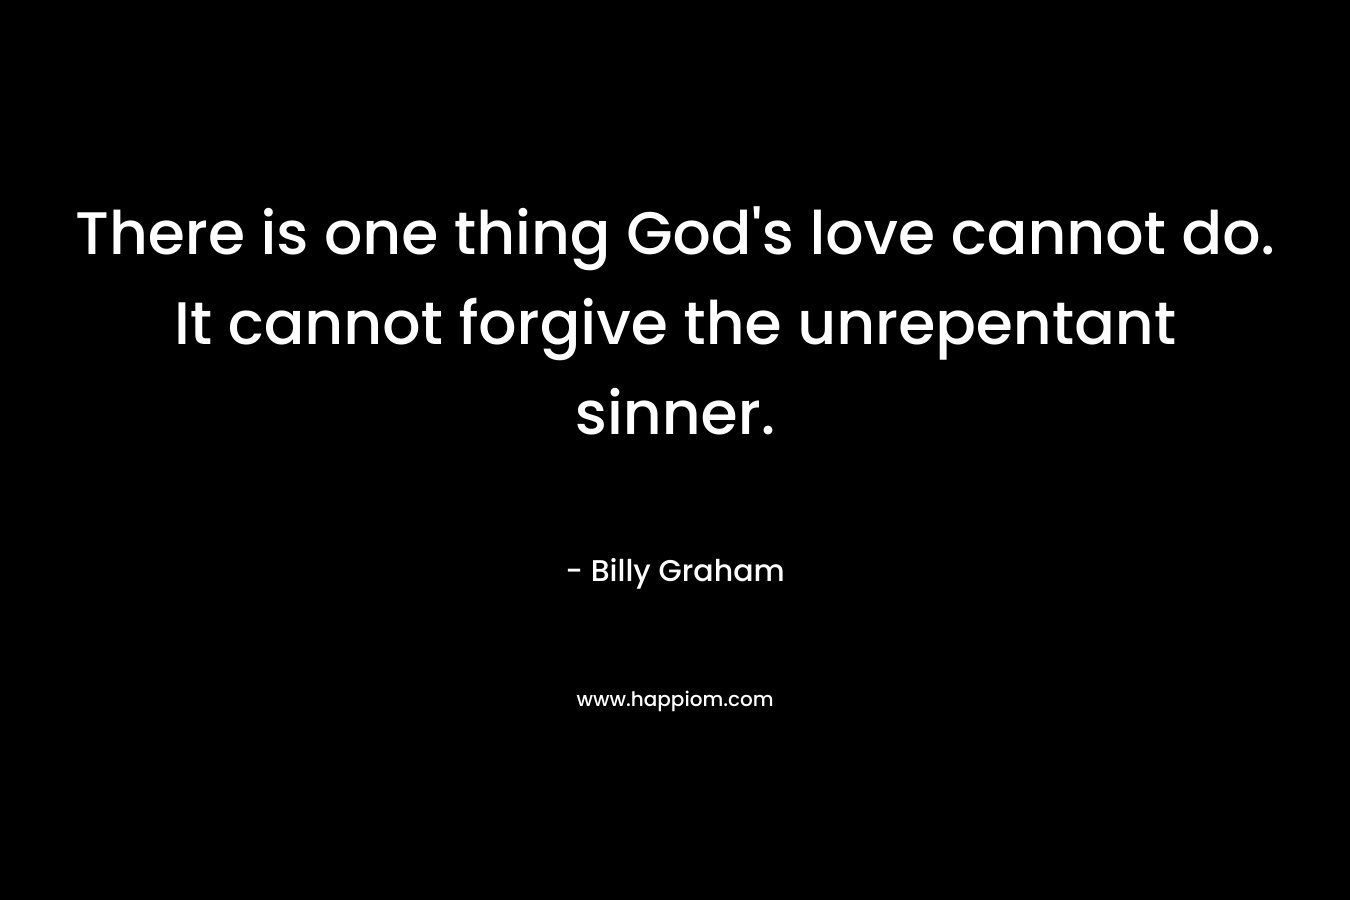 There is one thing God’s love cannot do. It cannot forgive the unrepentant sinner. – Billy Graham